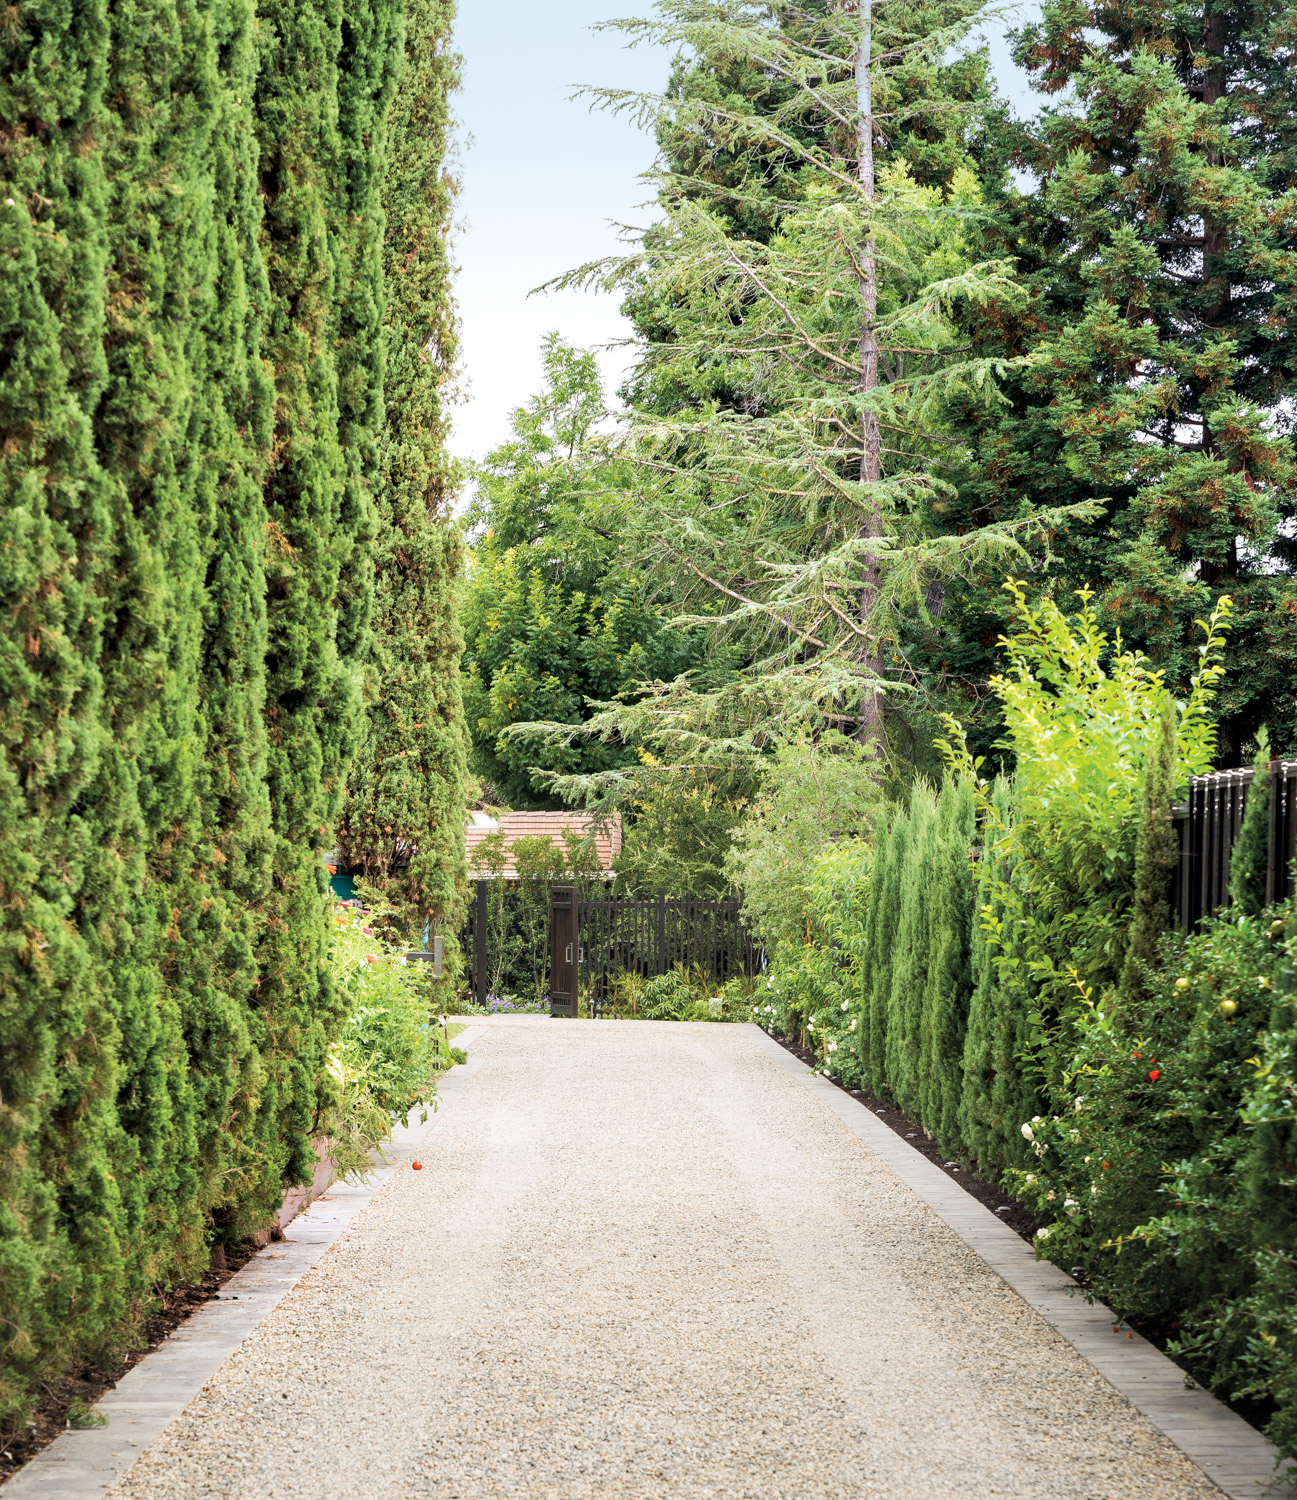 Long driveway lined with lush green trees